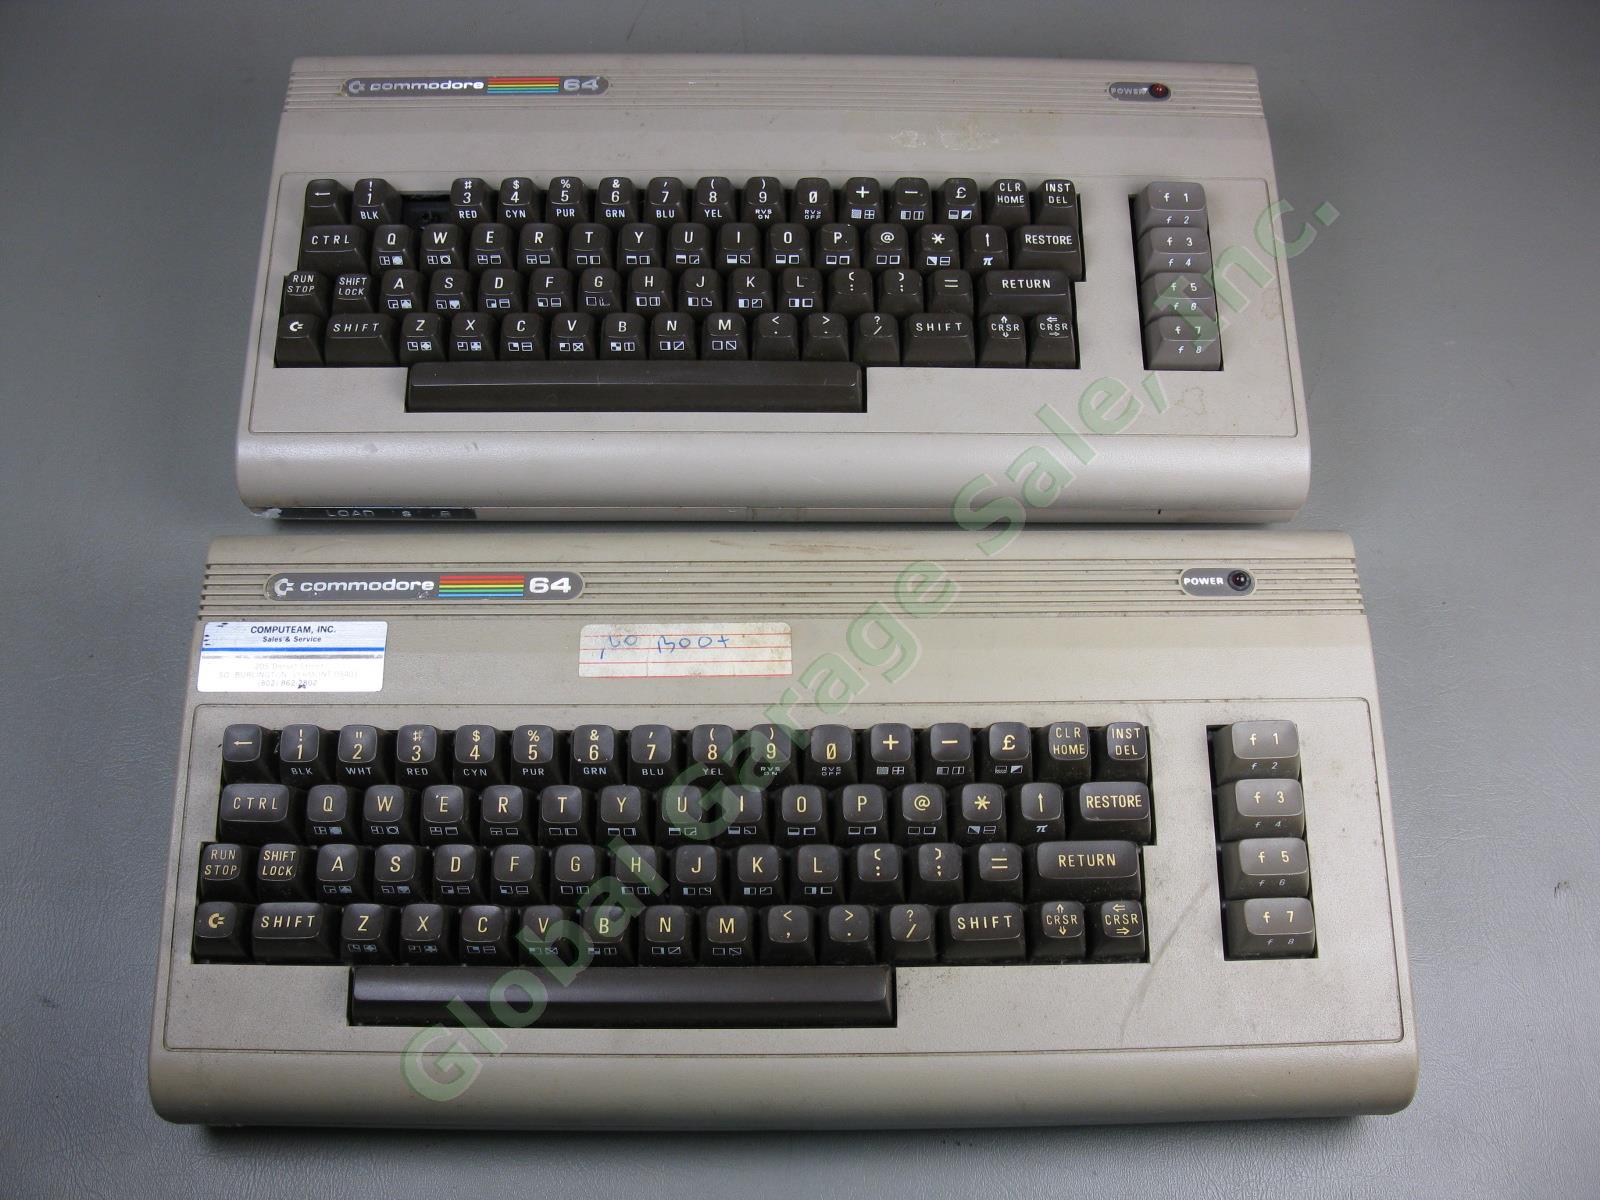 2 Vtg Commodore 64 Personal Computers Lot Untested As-Is Parts/Repair No Power?? 1